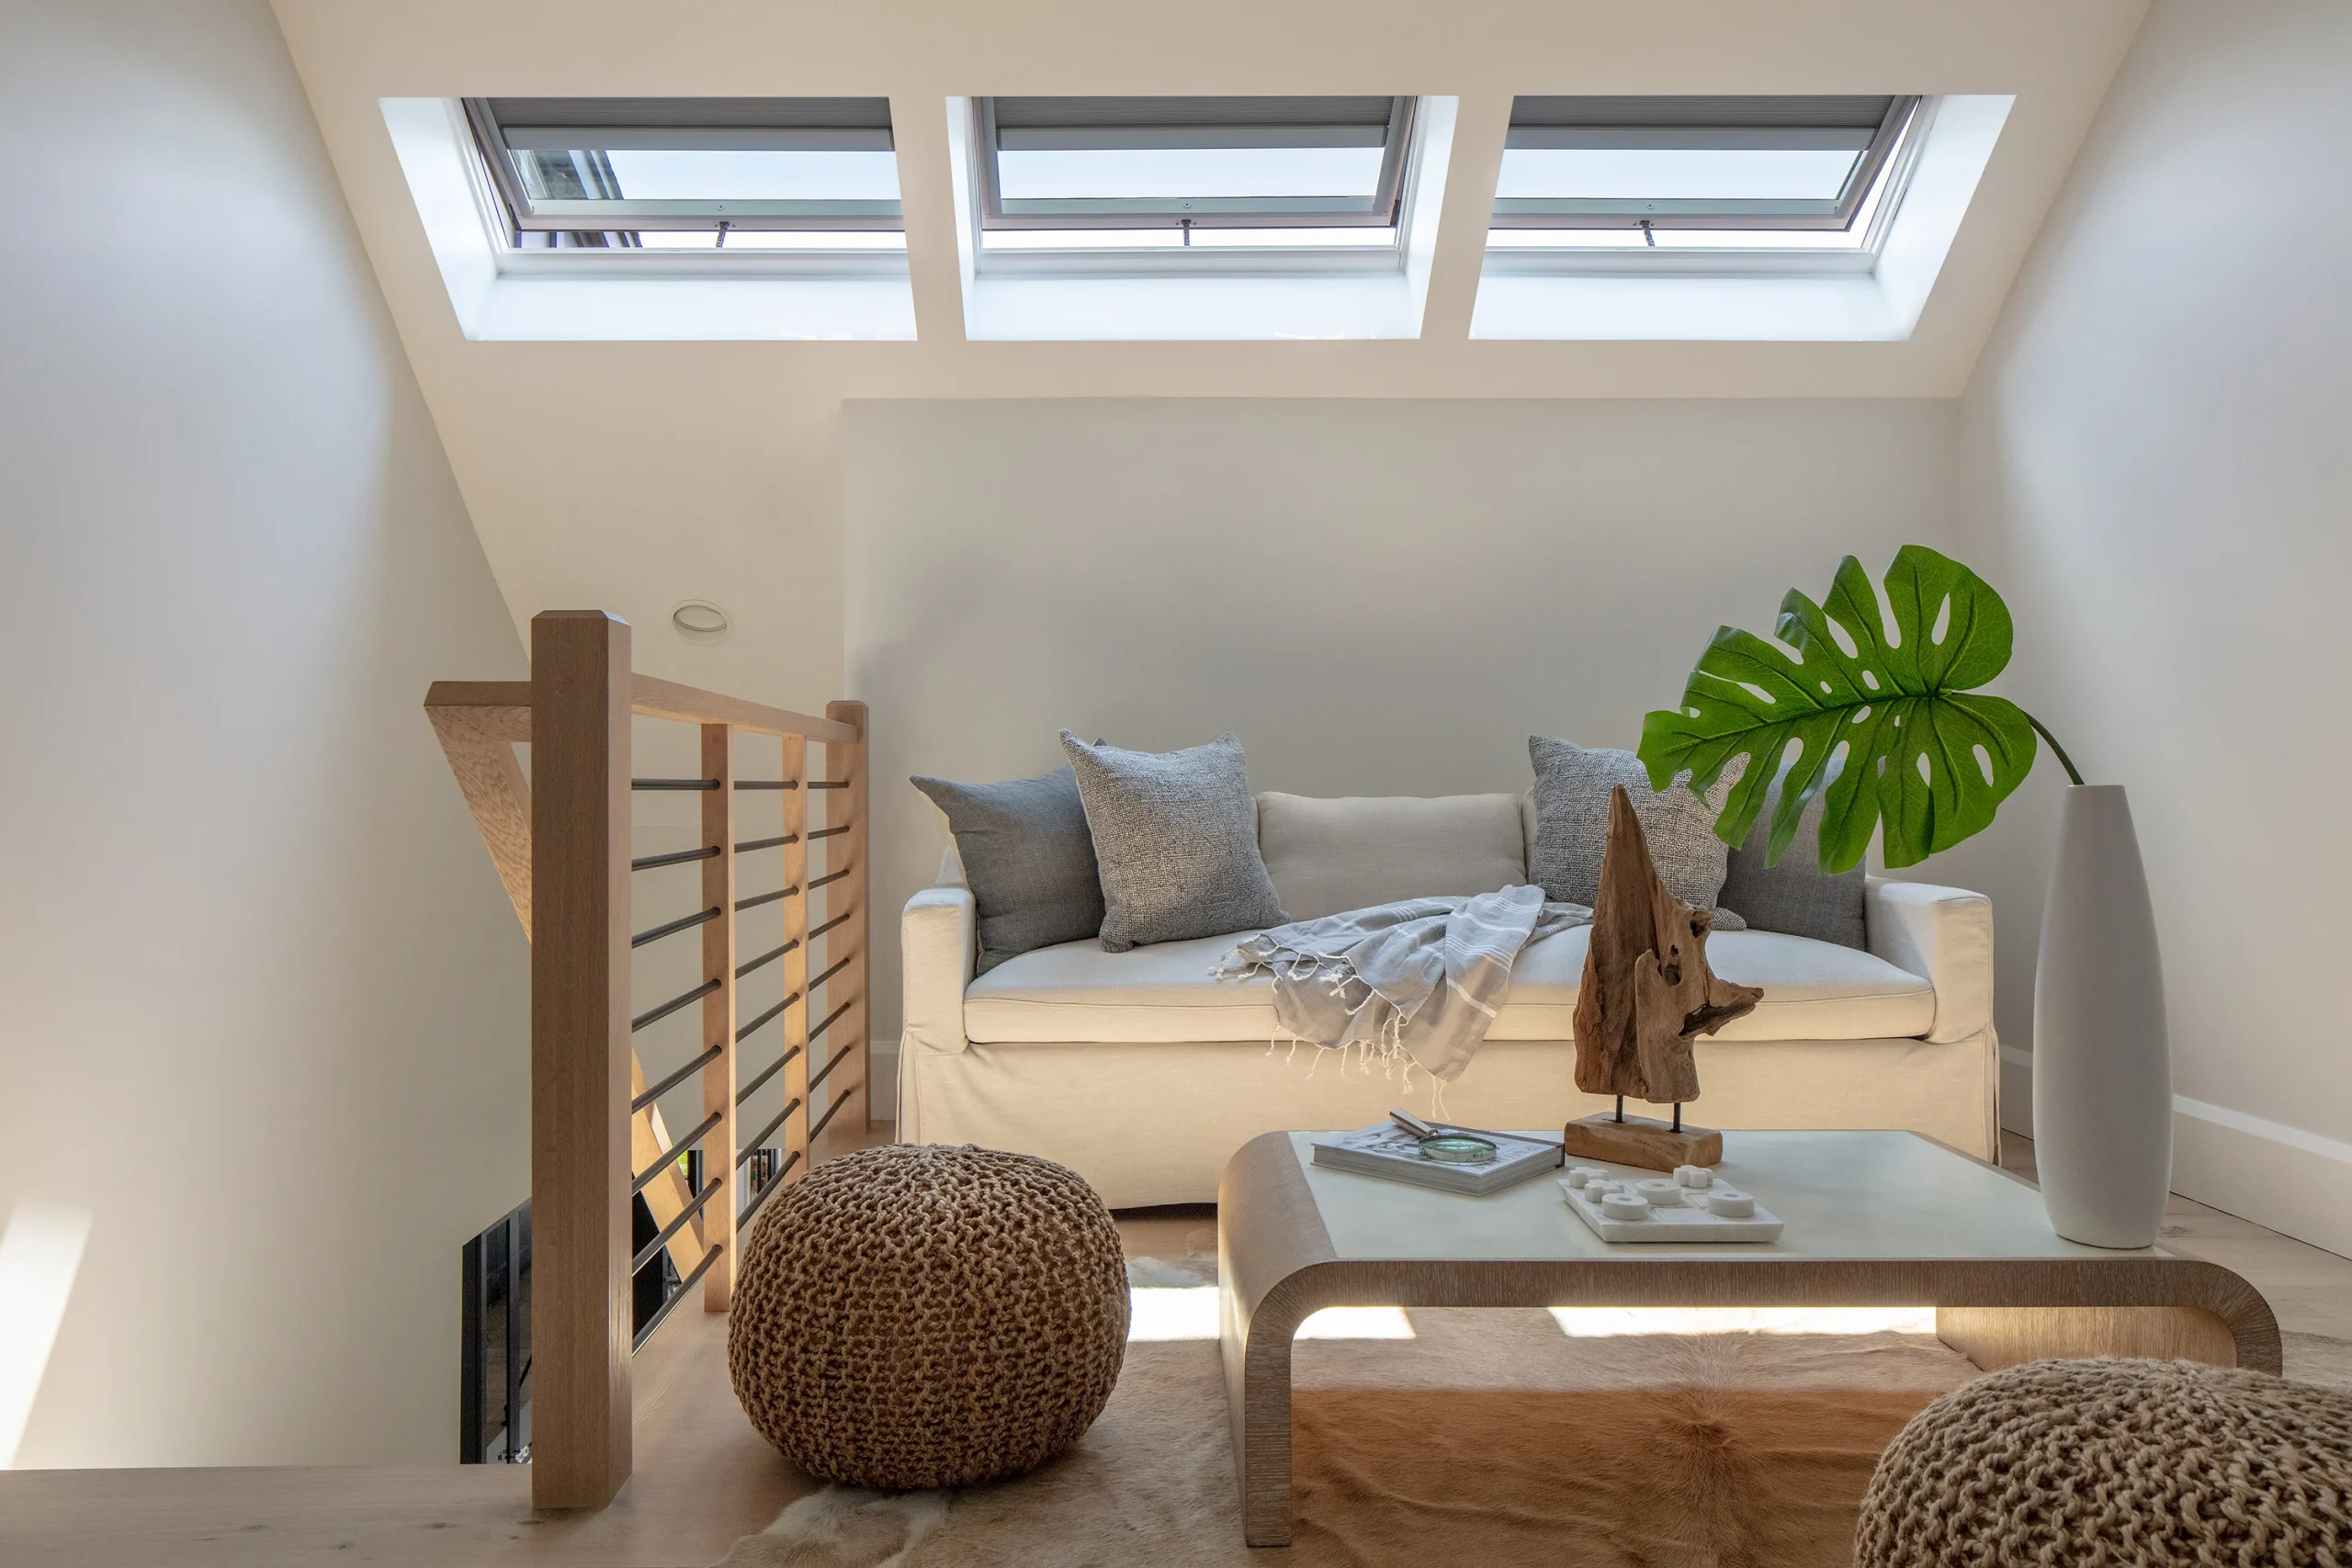 How Much Energy Does a Skylight Save